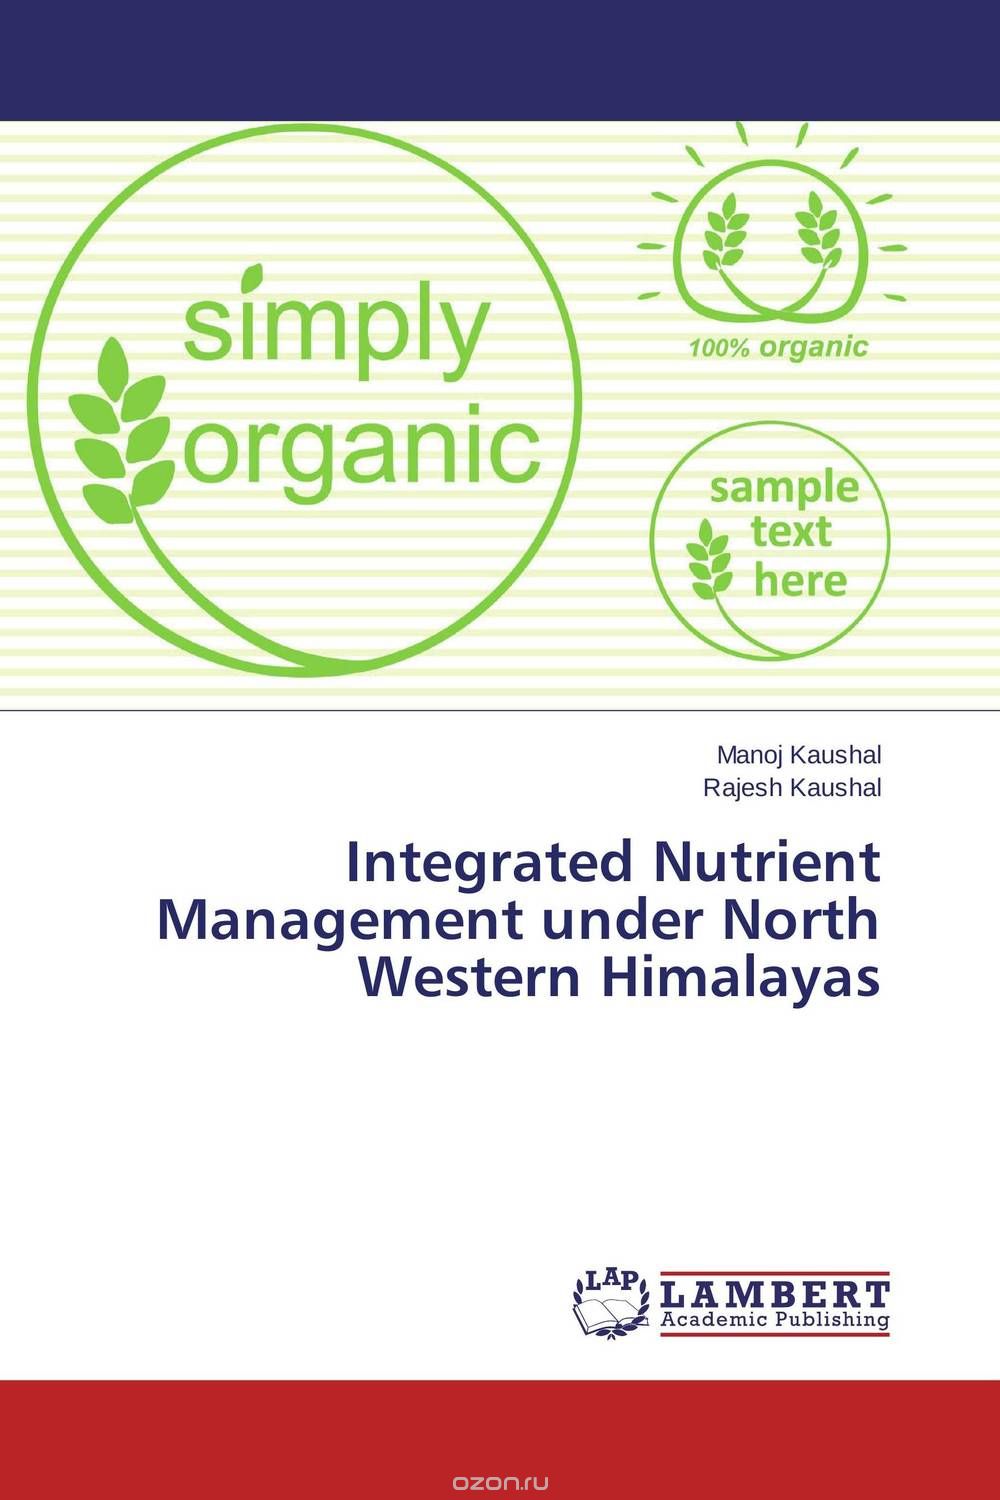 Integrated Nutrient Management under North Western Himalayas